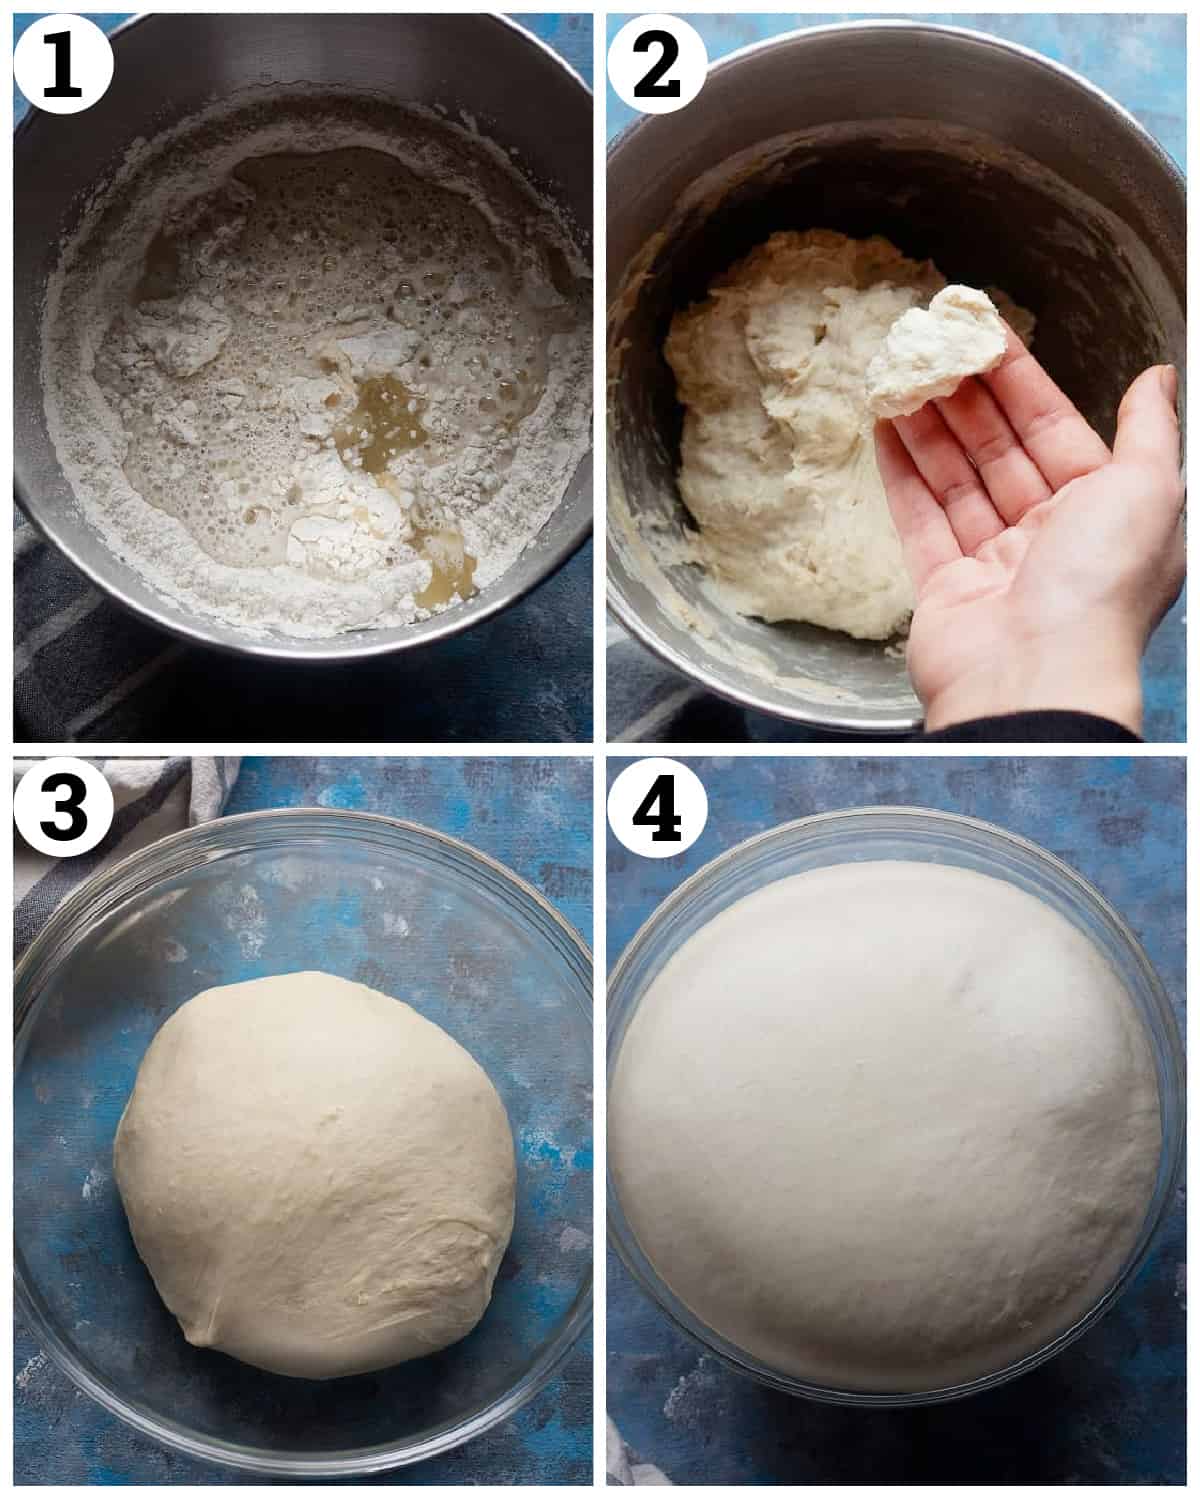 Mix the ingredients and shape the dough. Let it rise. 